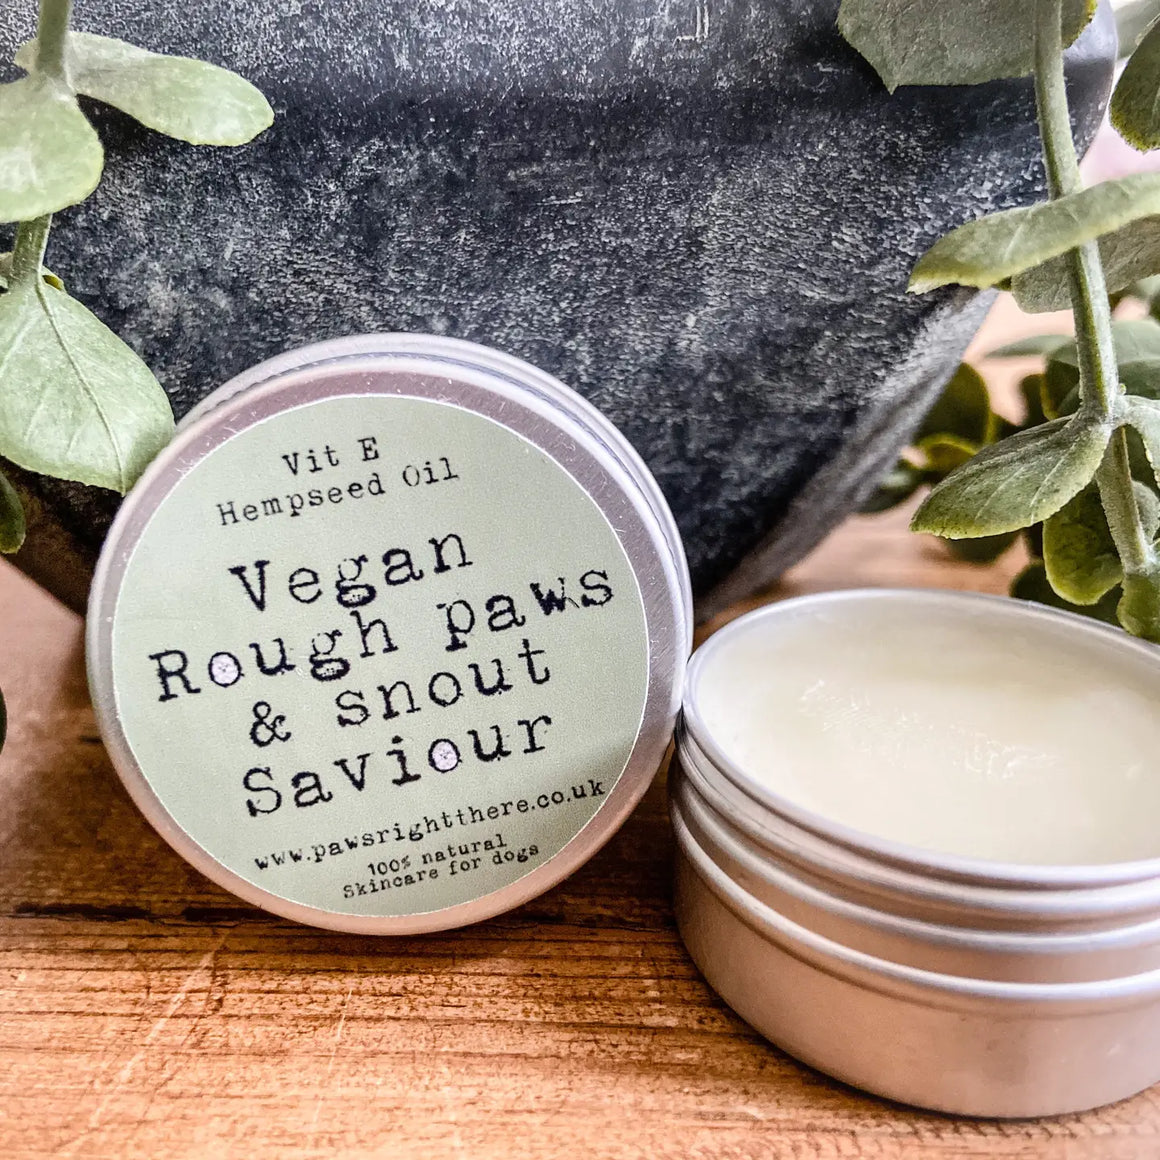 Paw Balm & Nose Balm for dogs - Vegan, Natural, Cruelty Free - Paws Right There